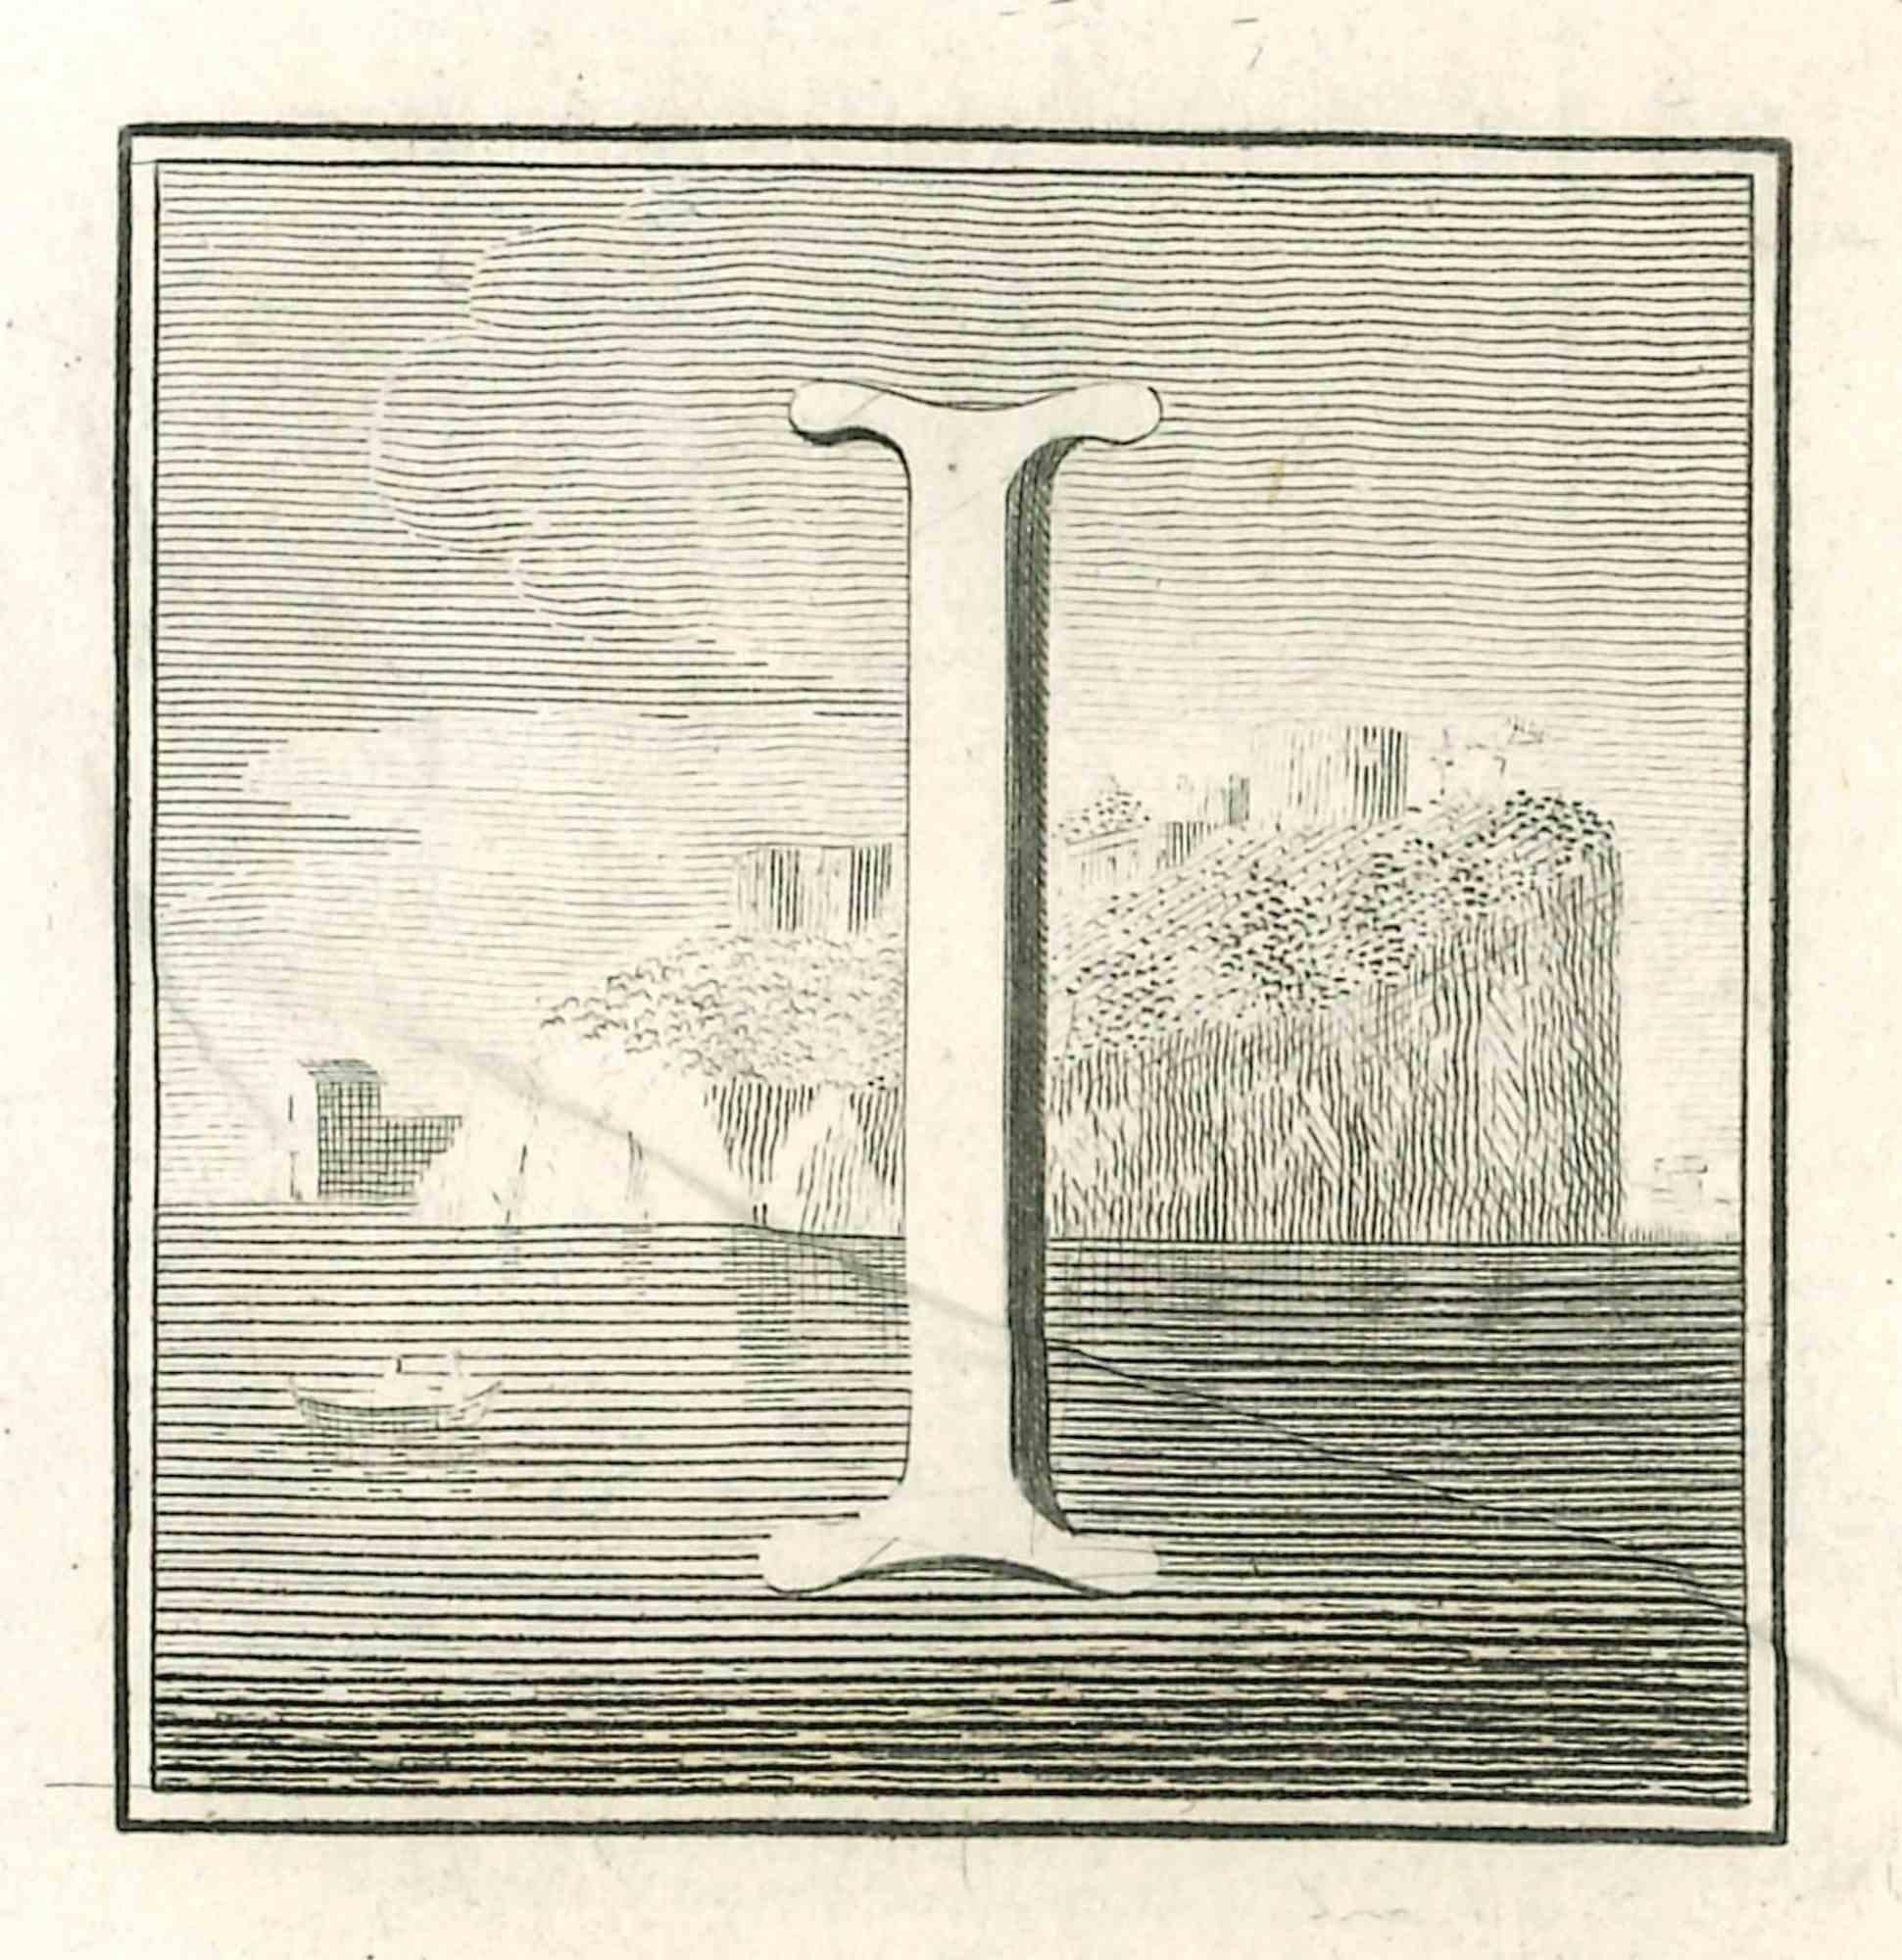 Letter I is an Etching realized by Luigi Vanvitelli.

The etching belongs to the print suite “Antiquities of Herculaneum Exposed” (original title: “Le Antichità di Ercolano Esposte”), an eight-volume volume of engravings of the finds from the